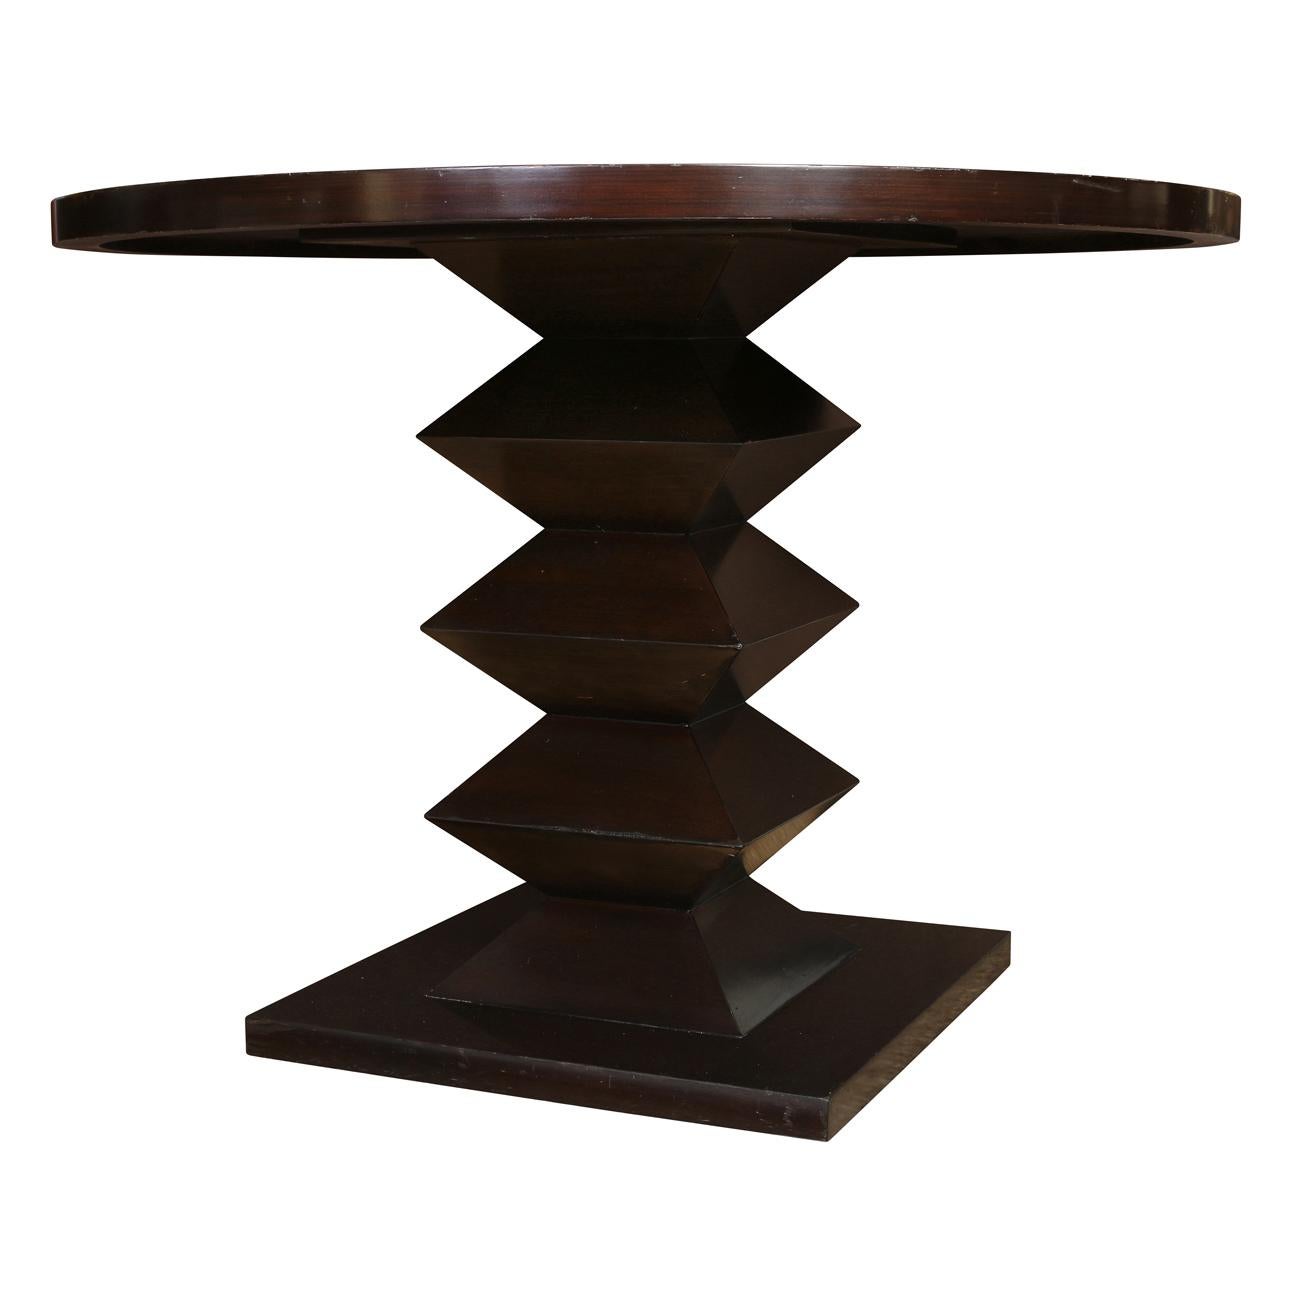 20th Century Modern Round Dining Table with Zig Zag Pedestal Base